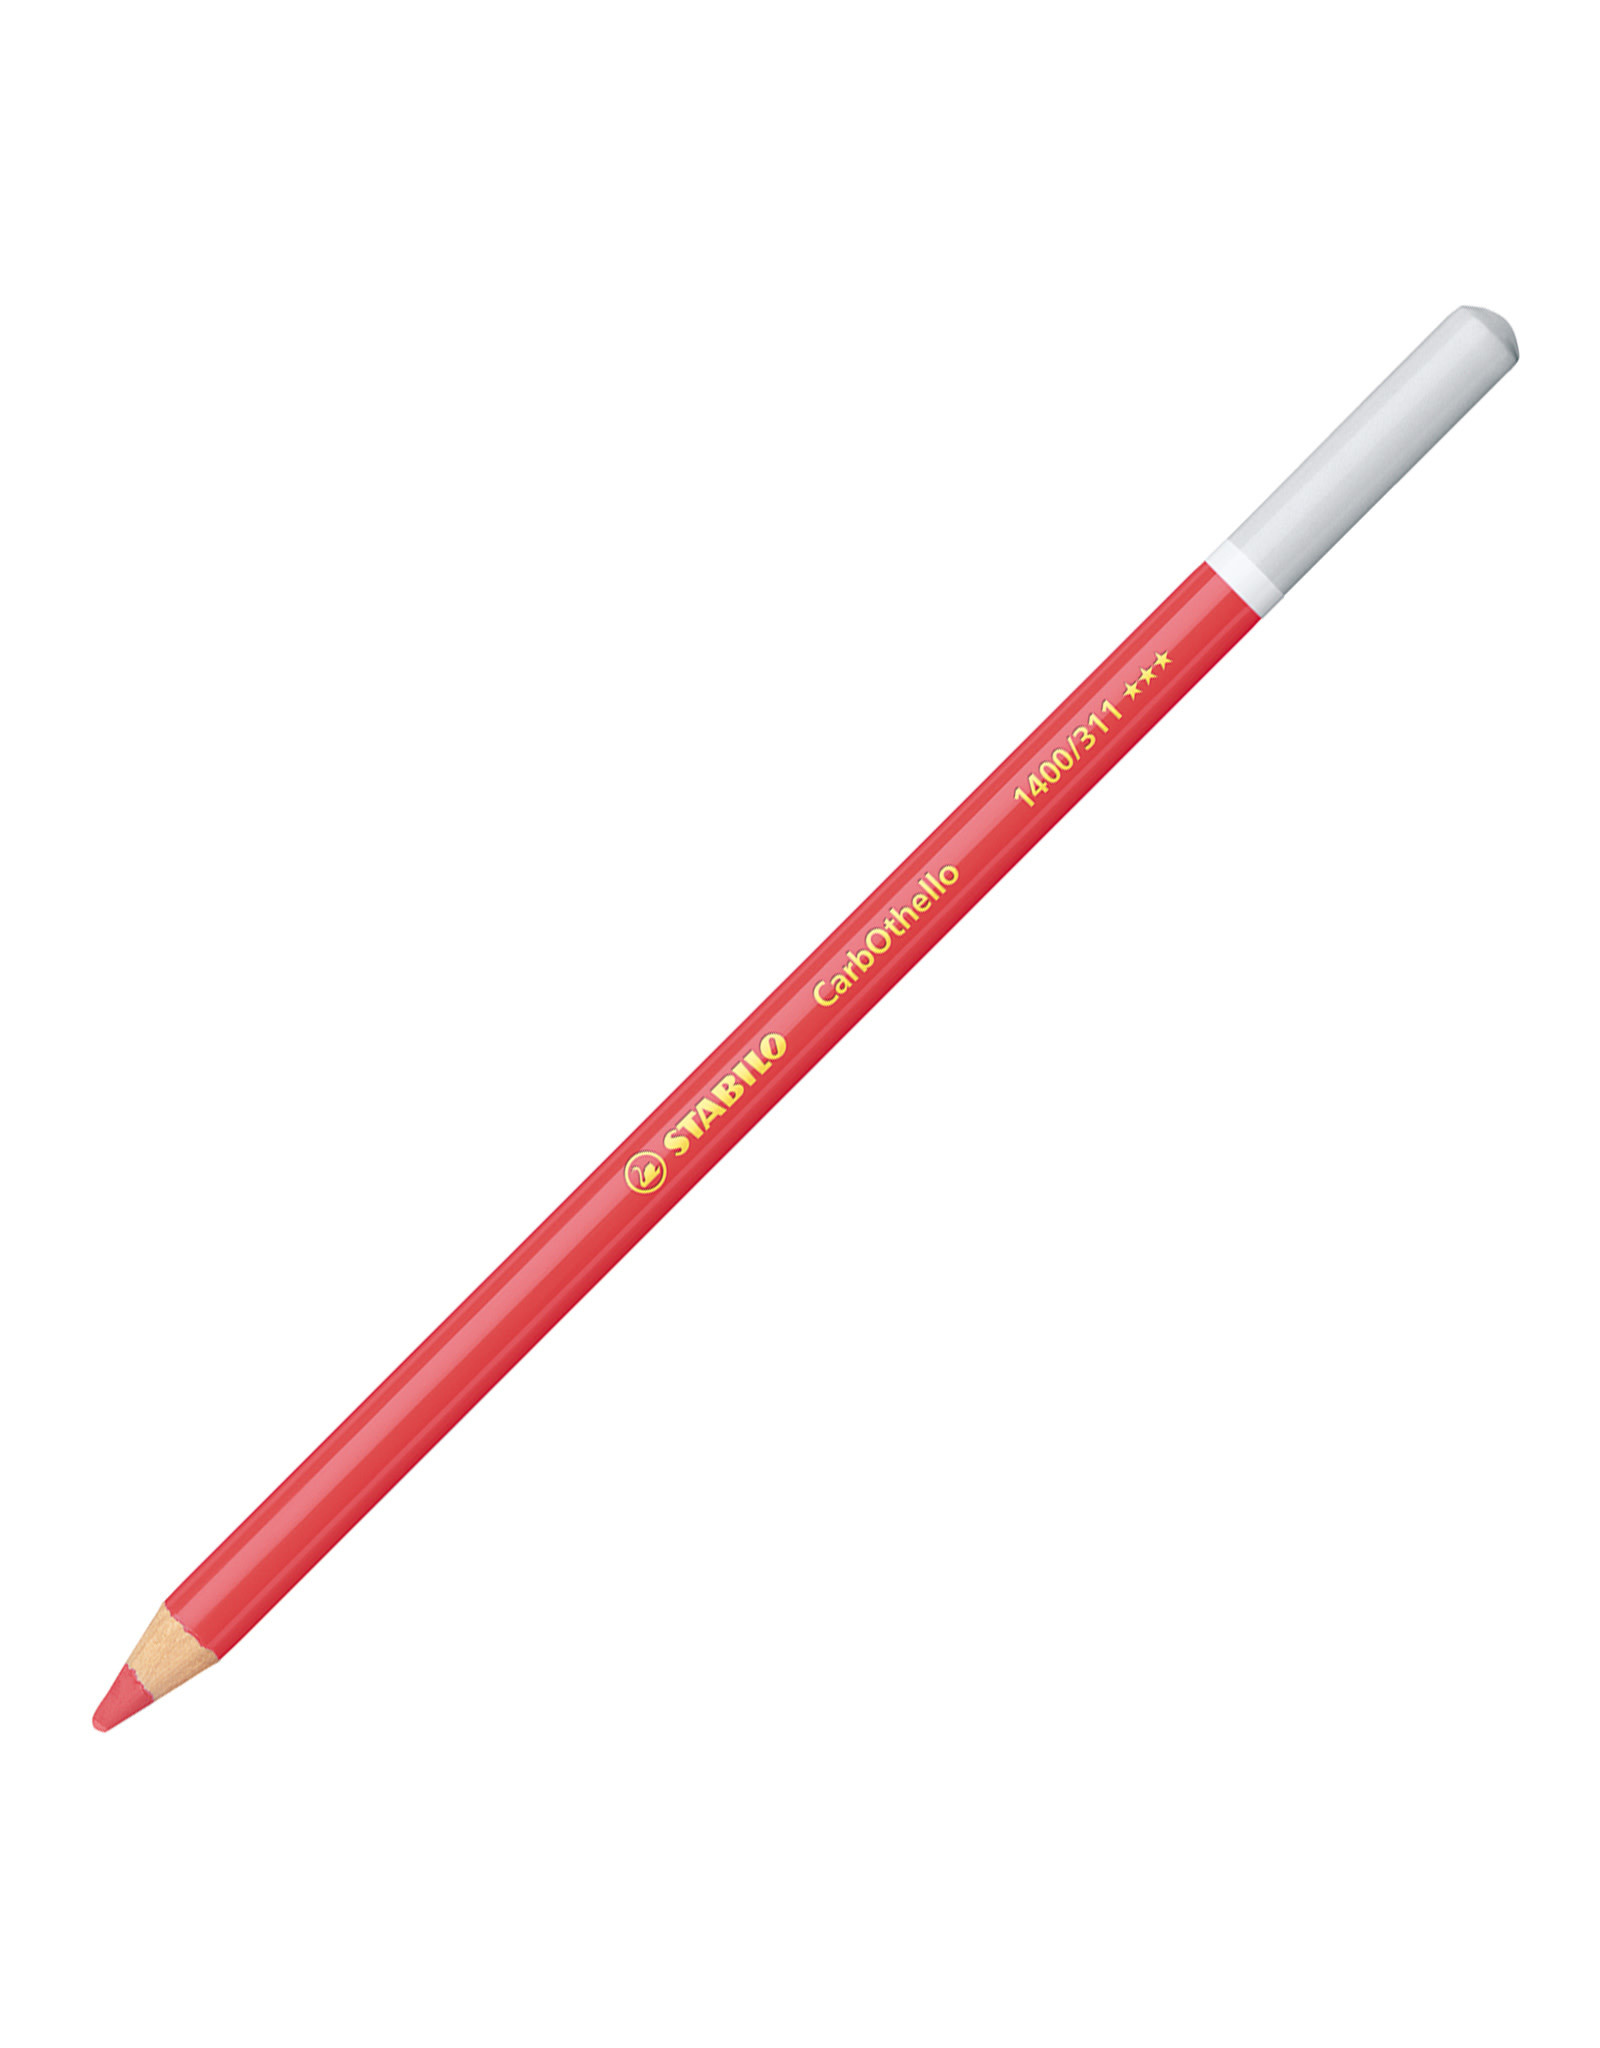 STABILO Stabilo Carbothello Pastel Pencil, Carmine Red Middle